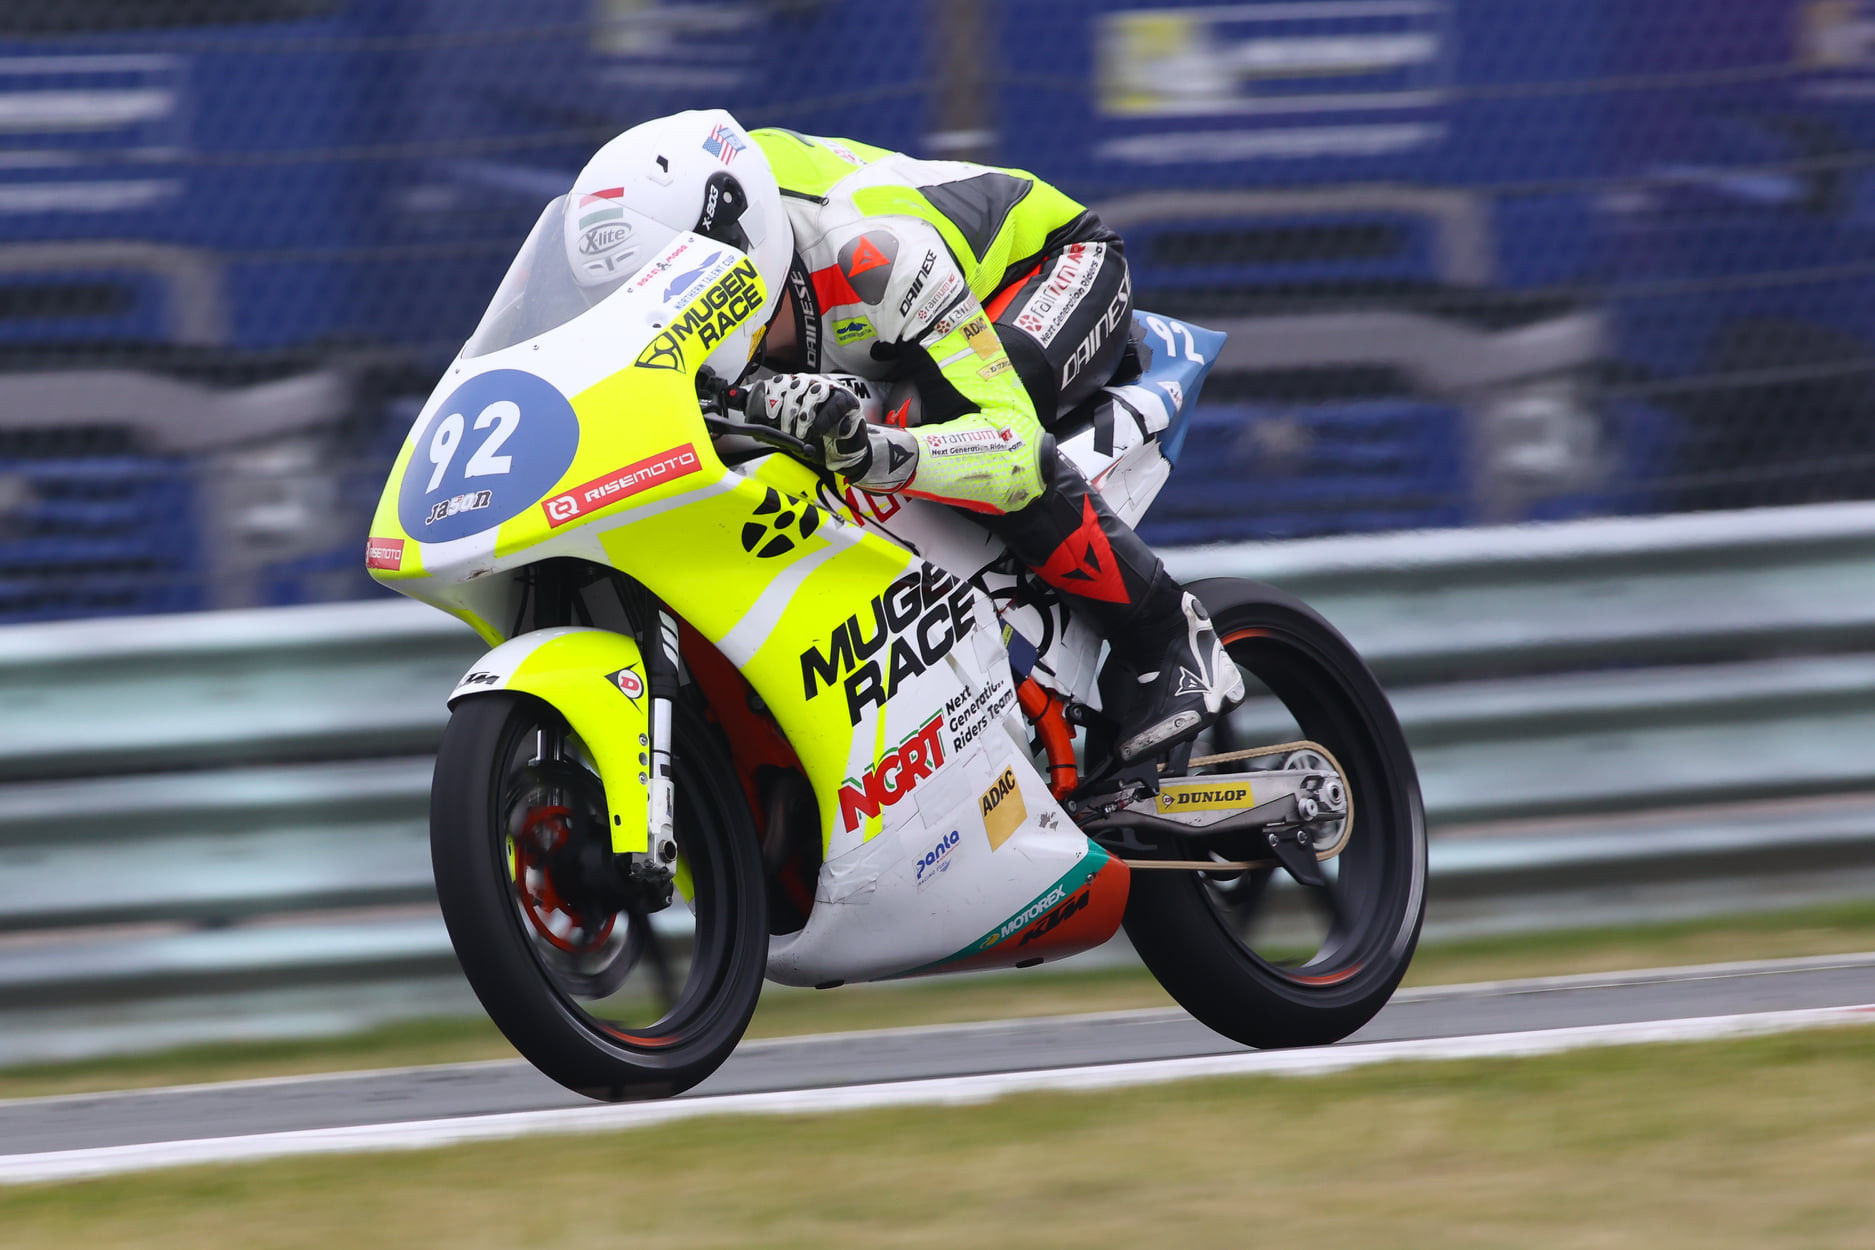 Rossi Moor (92) during Northern Talent Cup Q1 at Assen. Photo courtesy Northern Talent Cup.